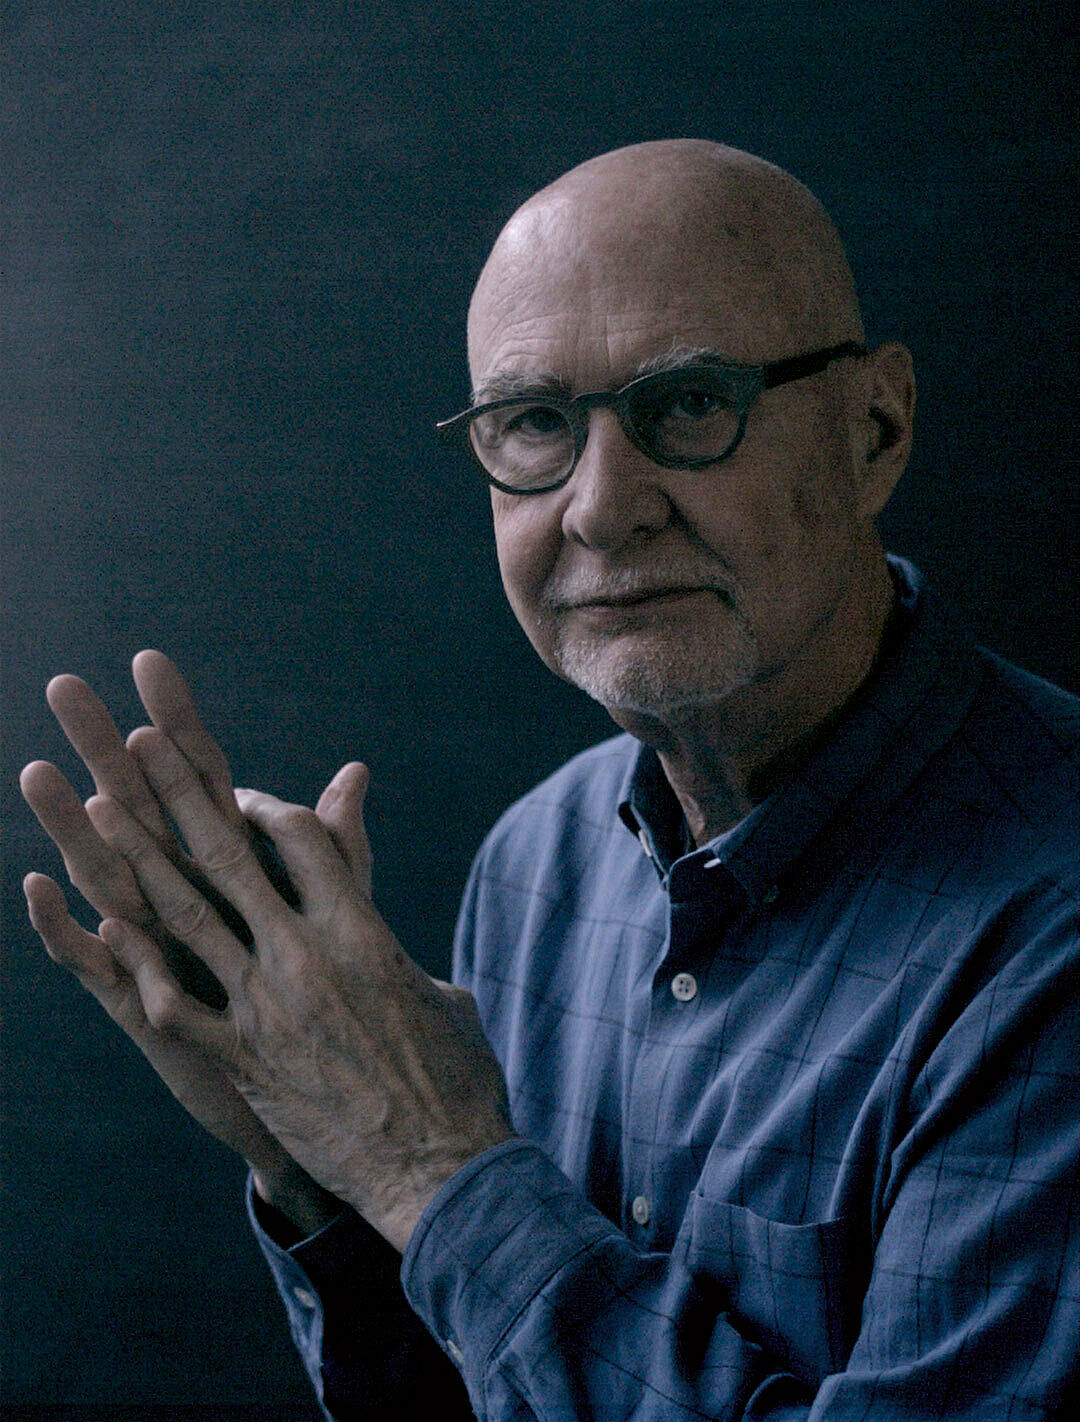 A still from a video work by James Nares. Art historian Douglas Crimp clasps his hands and looks directly at the camera